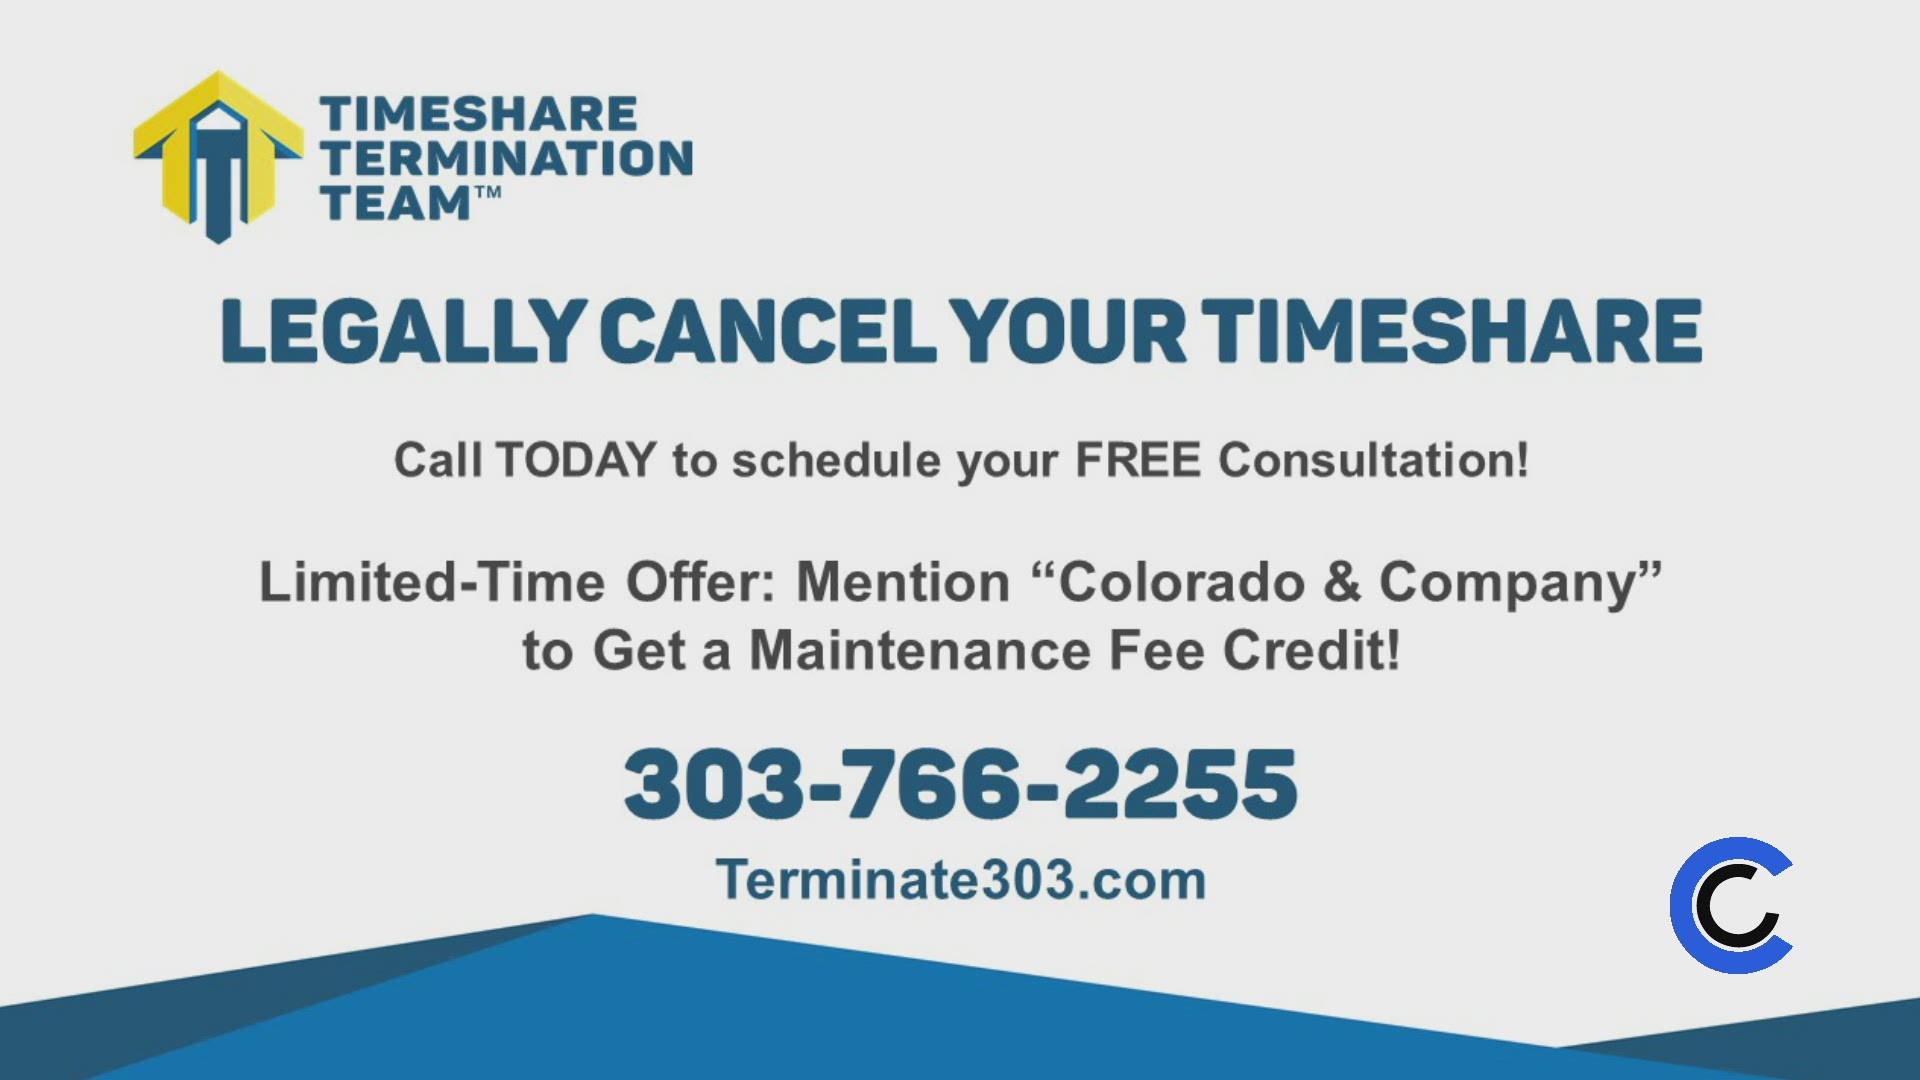 Get rid of that timeshare for good! Call 303.766.2255 or visit Terminate303.com to get started.